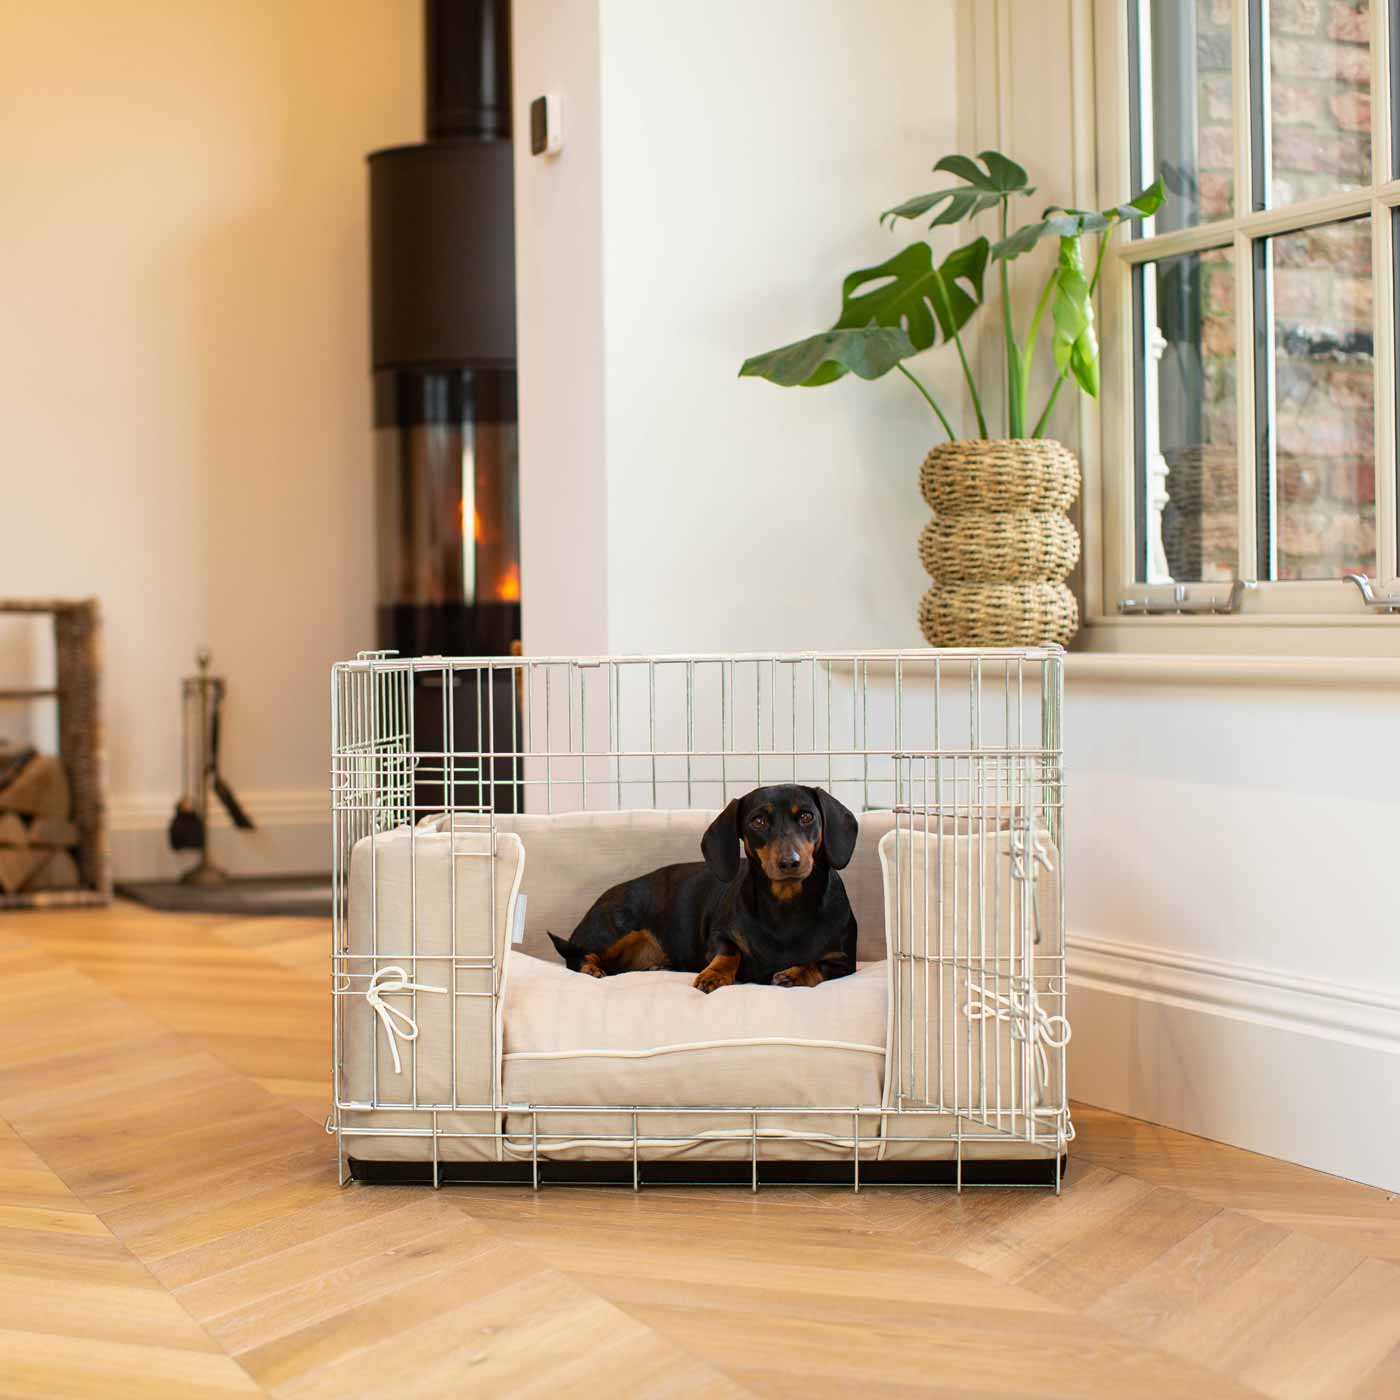 [colour:savanna oatmeal] Accessorise your dog crate with our stunning bumper covers, choose from our Savanna collection! Made using luxury fabric for the perfect crate accessory to build the ultimate dog den! Available now in 3 colours and sizes at Lords & Labradors